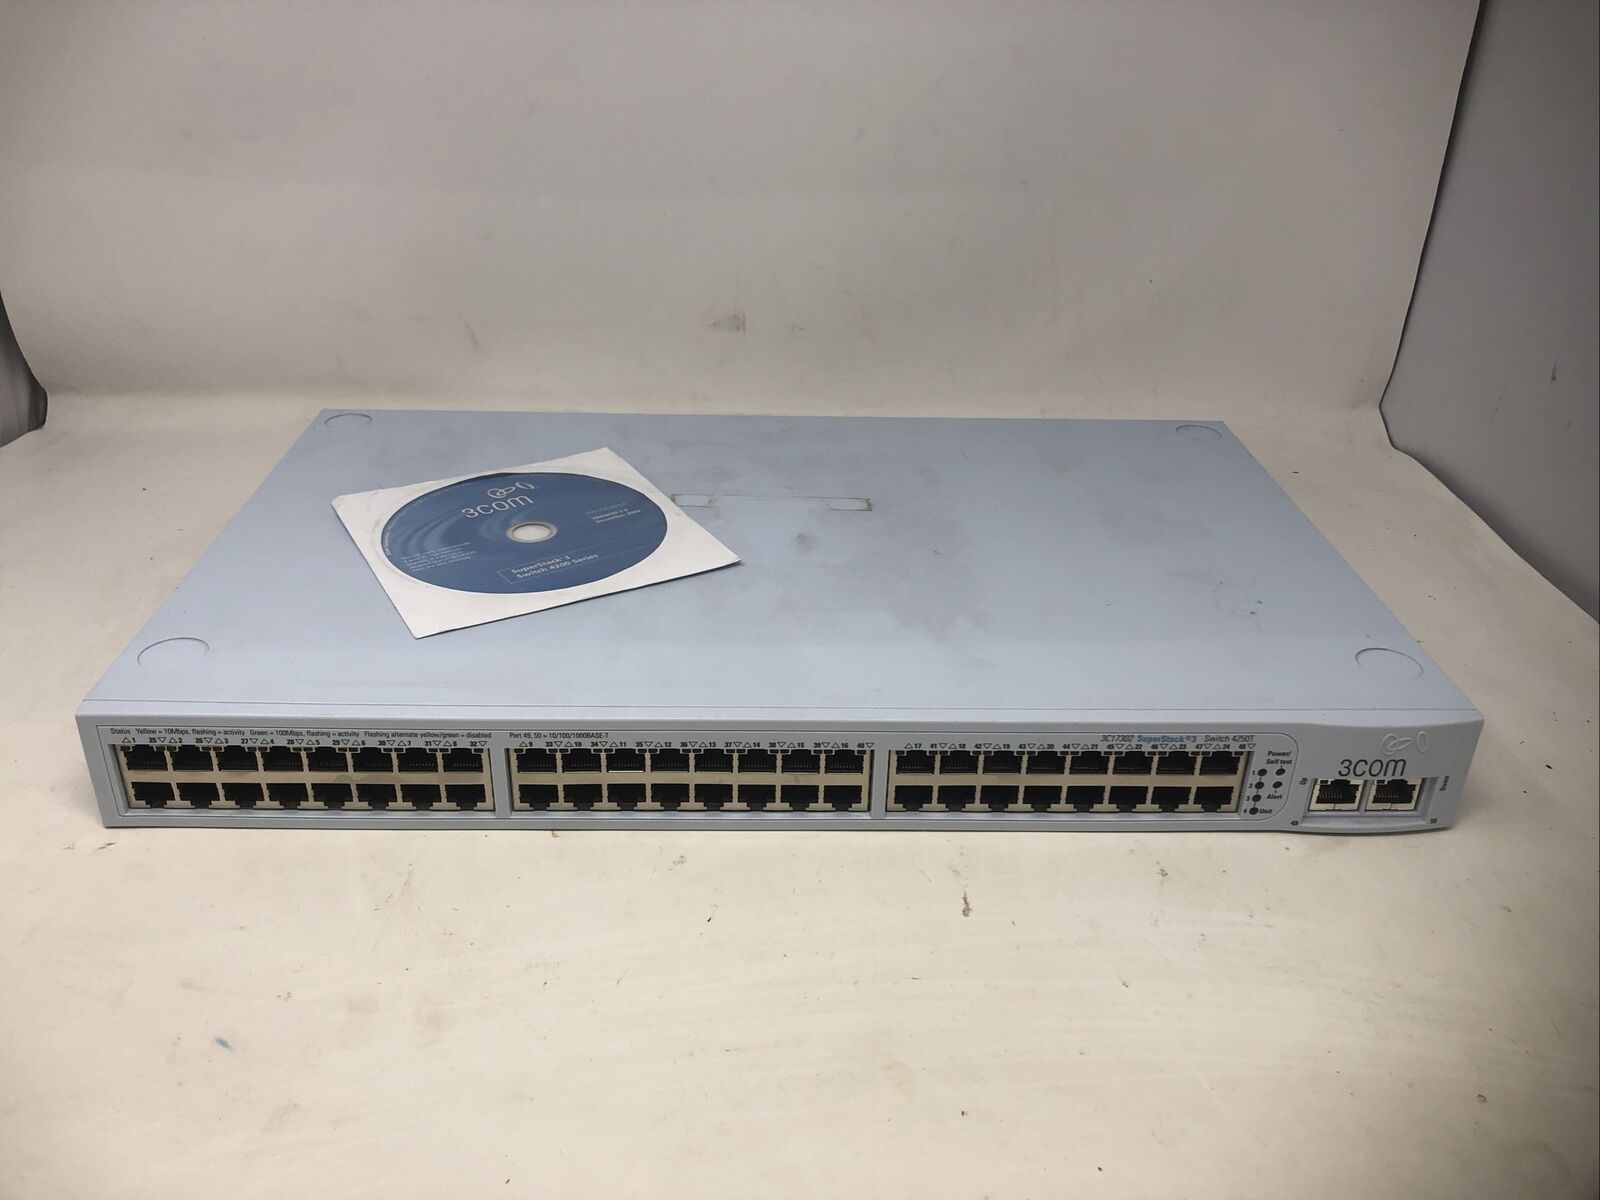 3COM SUPERSTACK 3 - 48 PORT SWITCH 4250T 3C17302 - PREOWNED